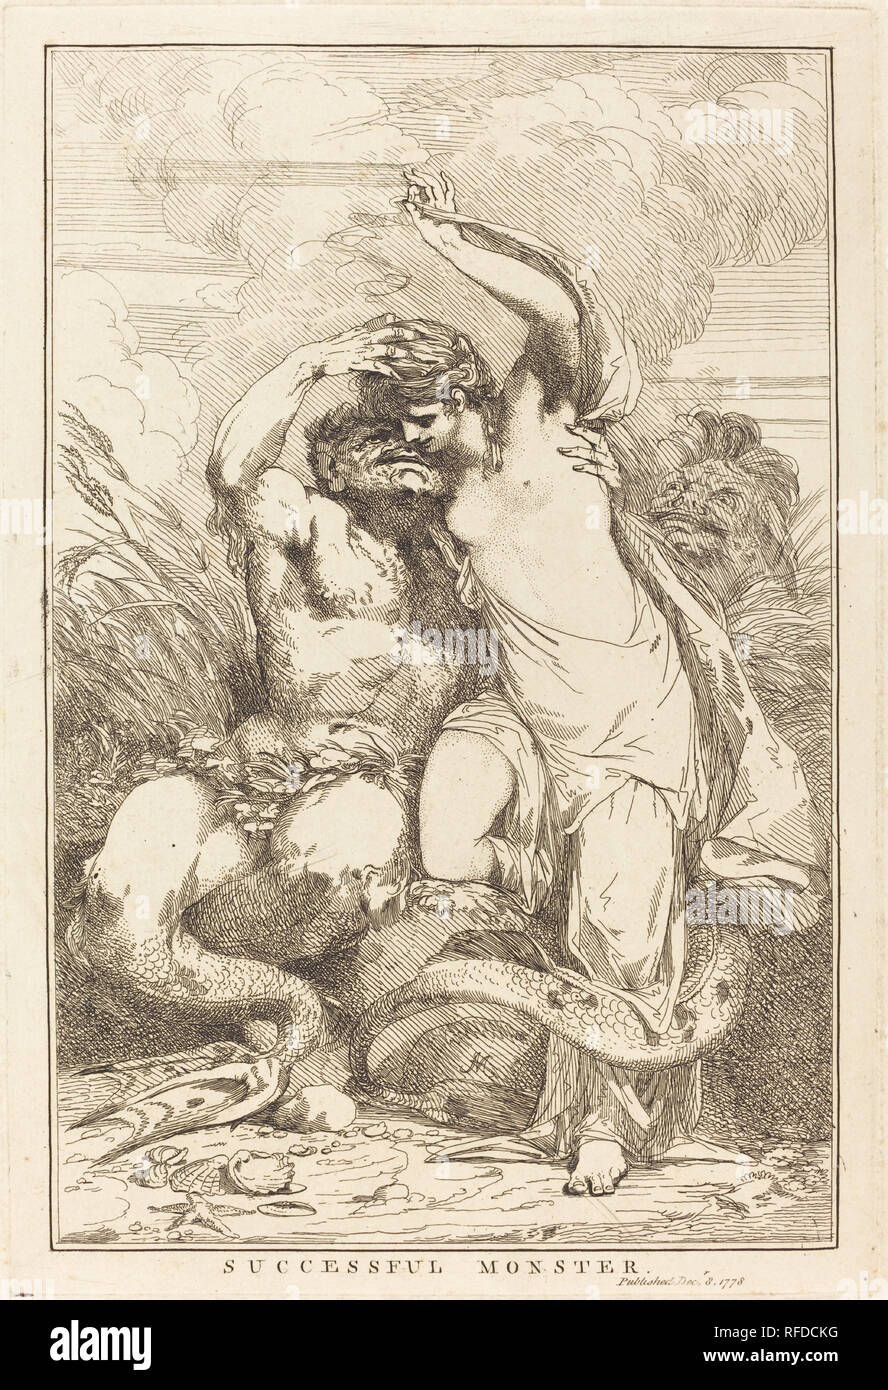 Successful Monster. Dated: 1778. Dimensions: plate: 30 x 20.2 cm (11 13/16 x 7 15/16 in.)  sheet: 41 x 29.2 cm (16 1/8 x 11 1/2 in.)  overall (mat size): 40.6 x 55.9 cm (16 x 22 in.). Medium: etching. Museum: National Gallery of Art, Washington DC. Author: John Hamilton Mortimer. Stock Photo